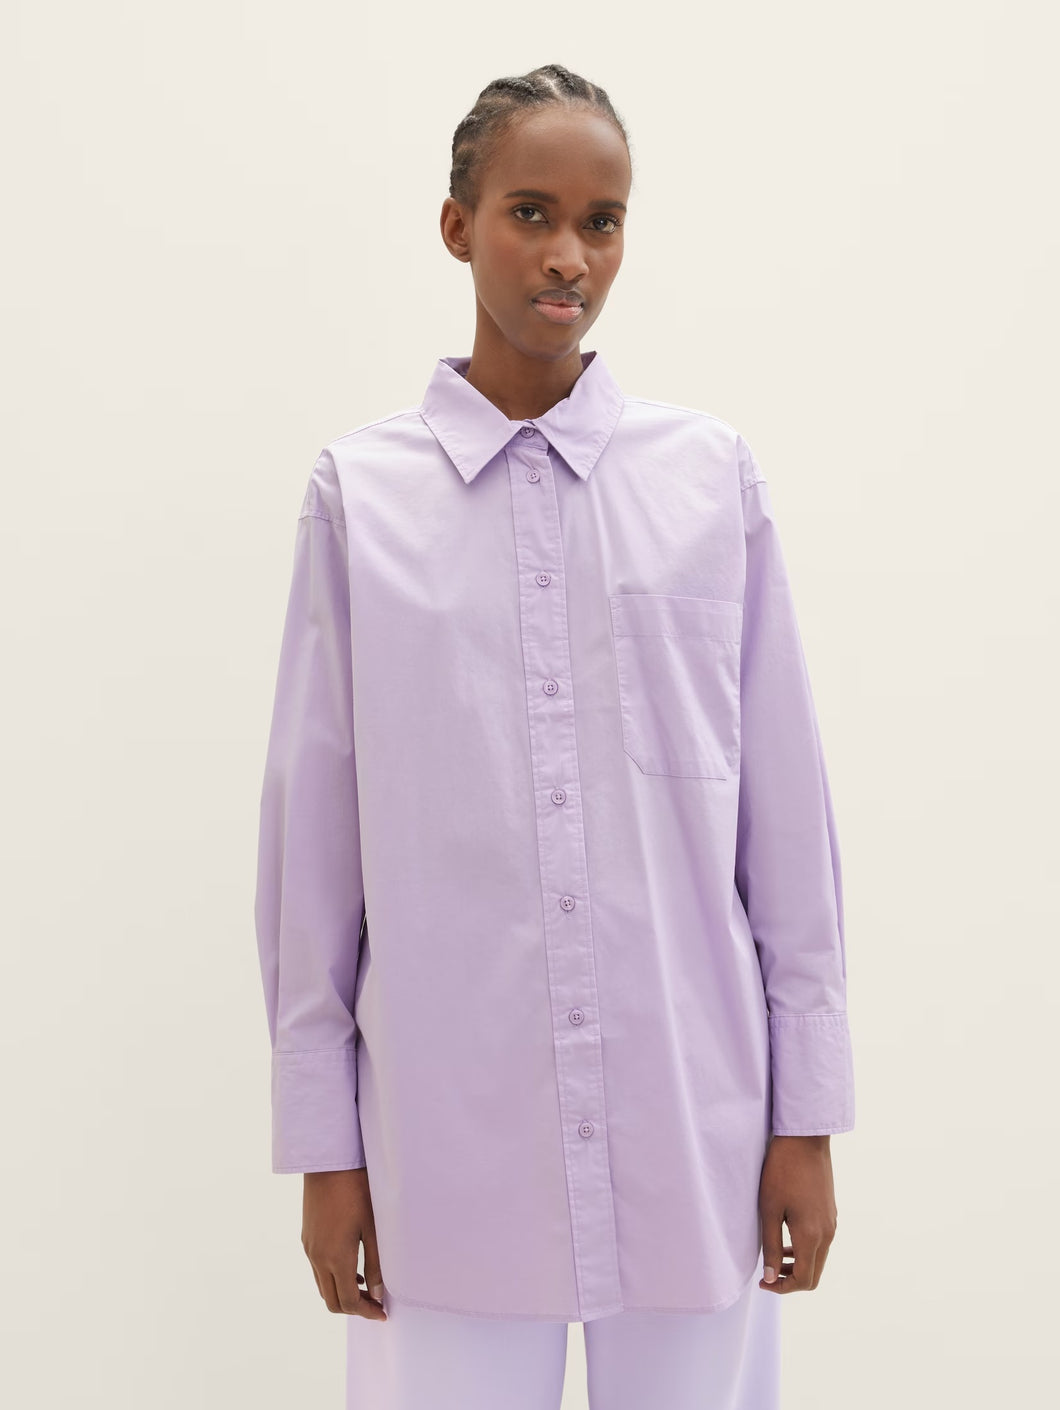 Tom Tailor Oversized Button Front Shirt in White or Lilac Vibe